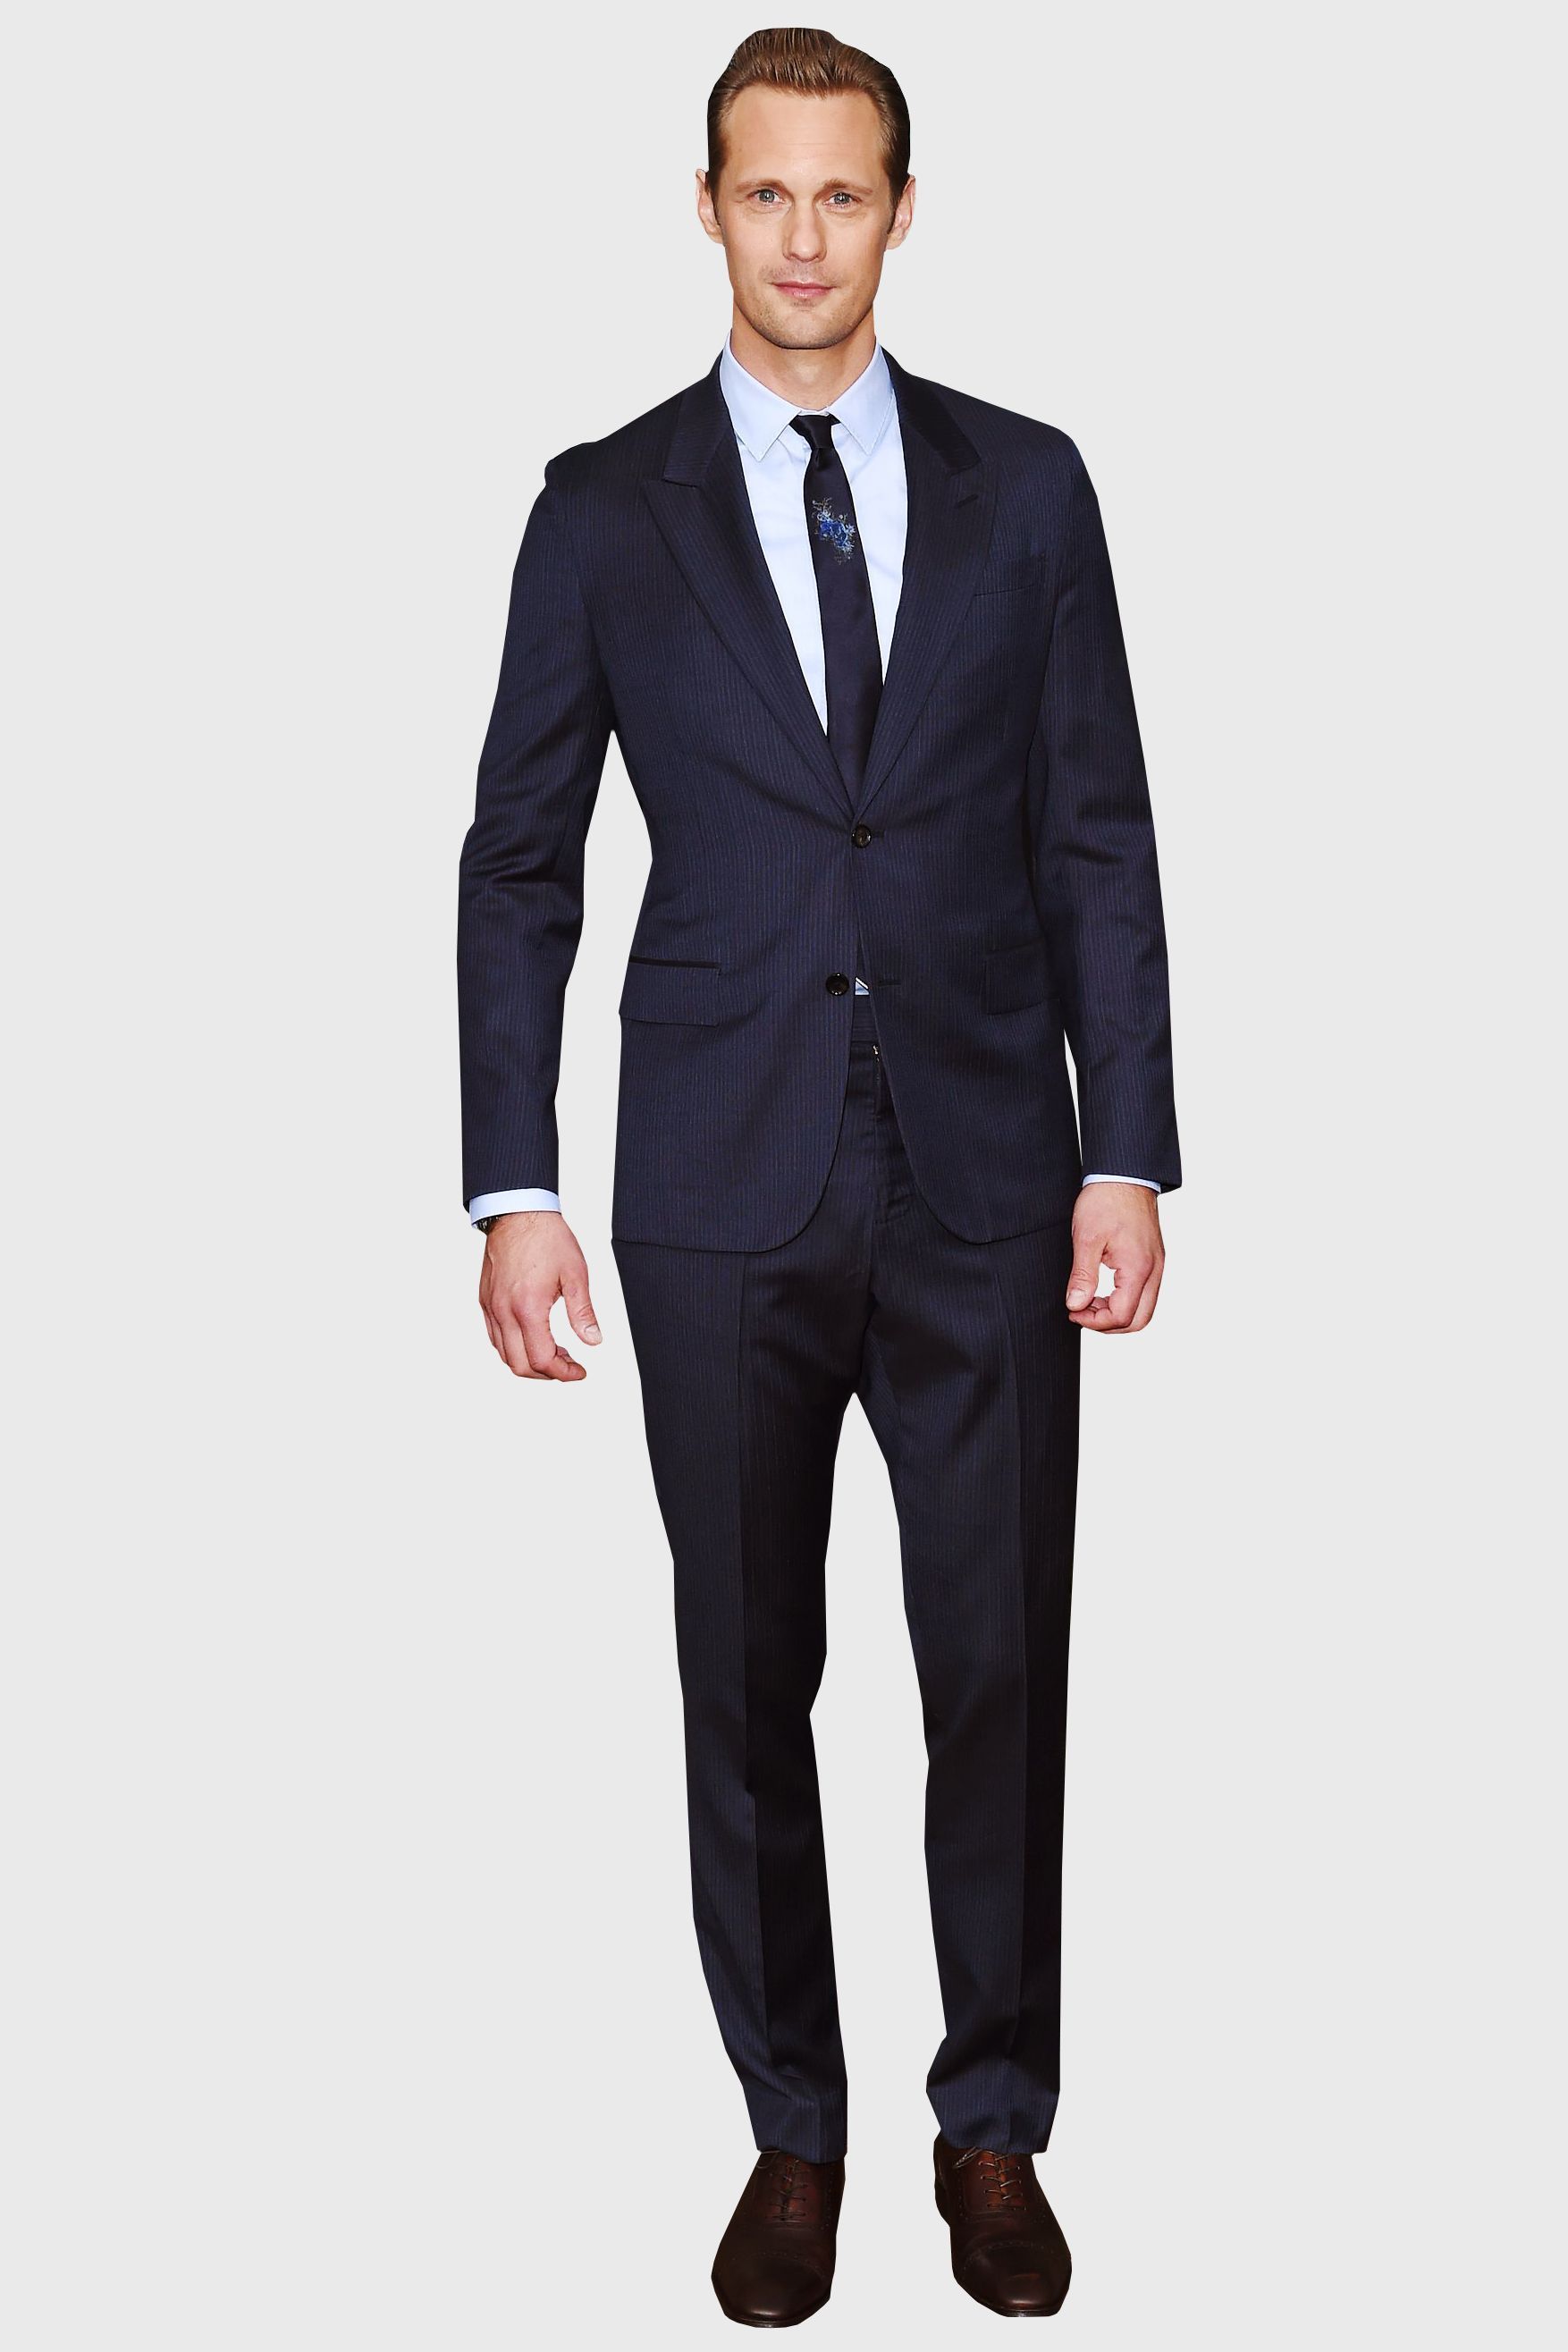 men's outfits to wear to a wedding